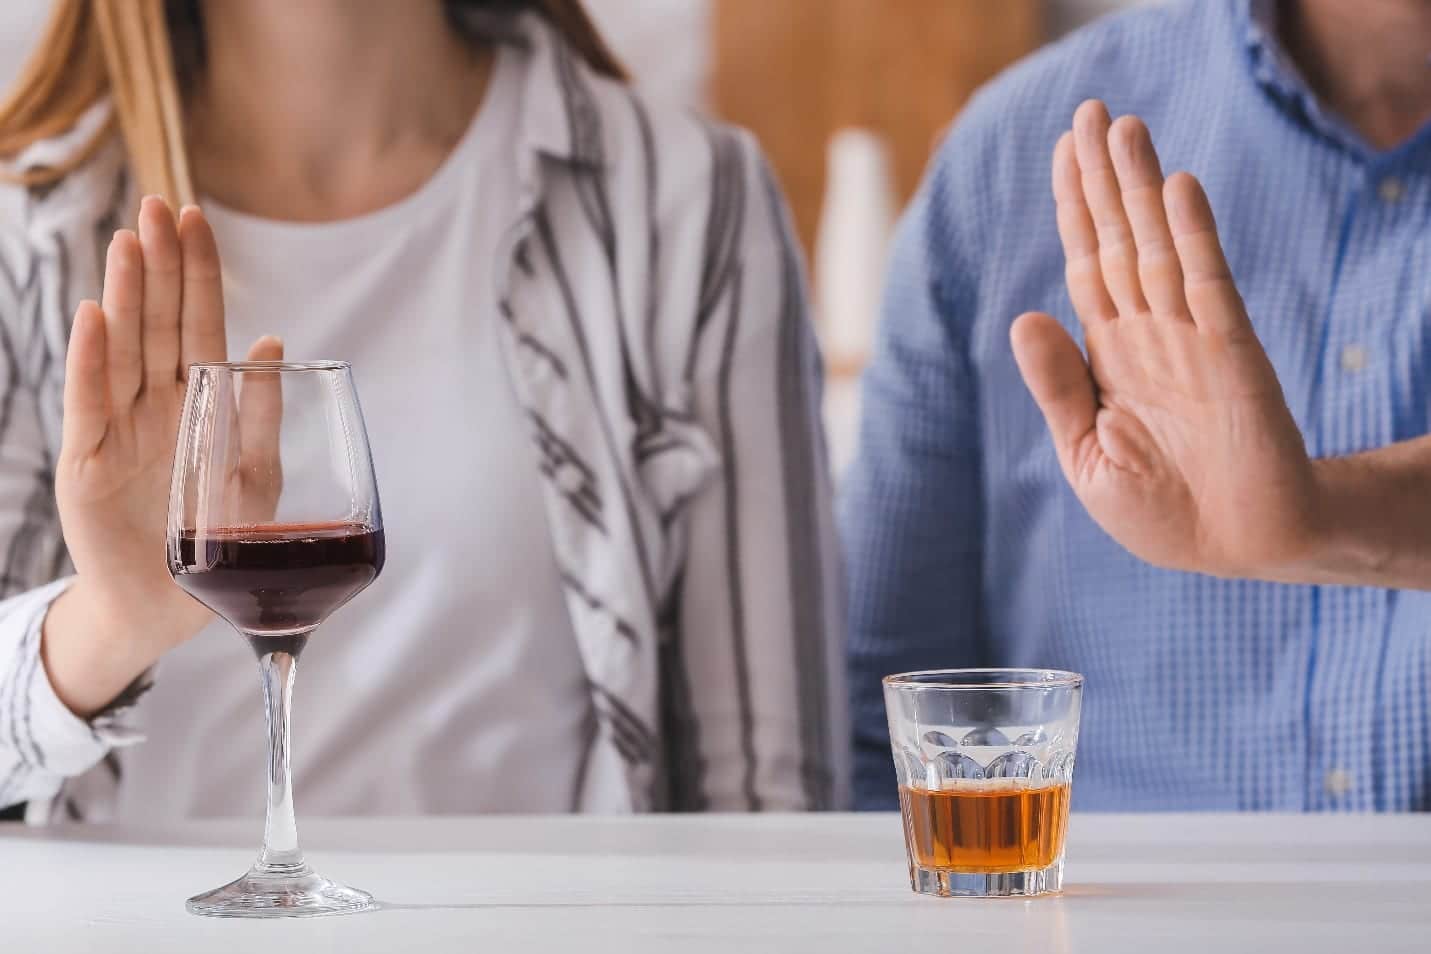 Couple refusing to drink wine and whiskey